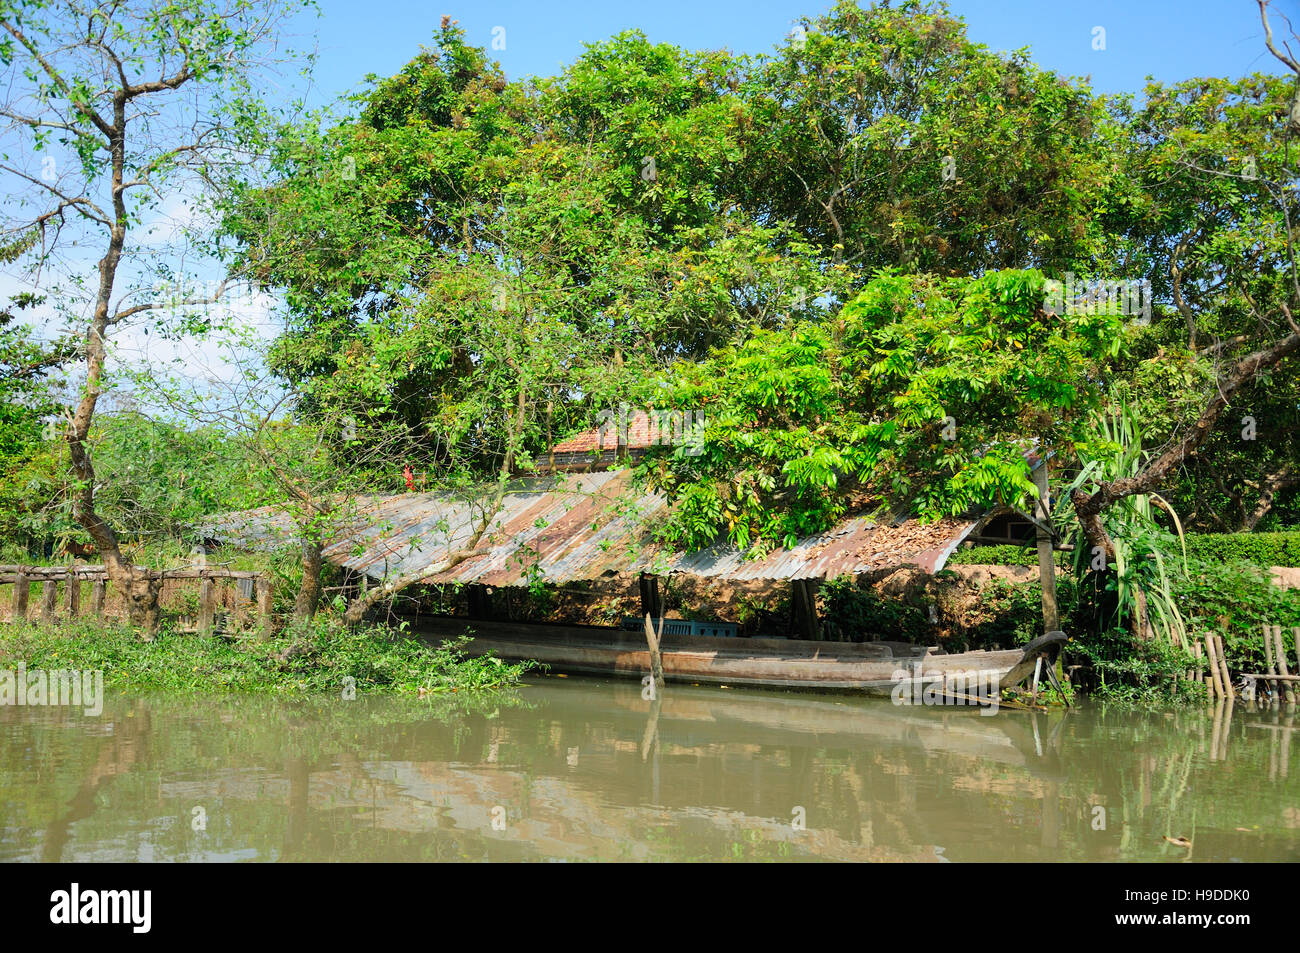 A covered area protecting a boat within the Mekong river delta in Vinh Long area of South Vietnam on a sunny day. Stock Photo